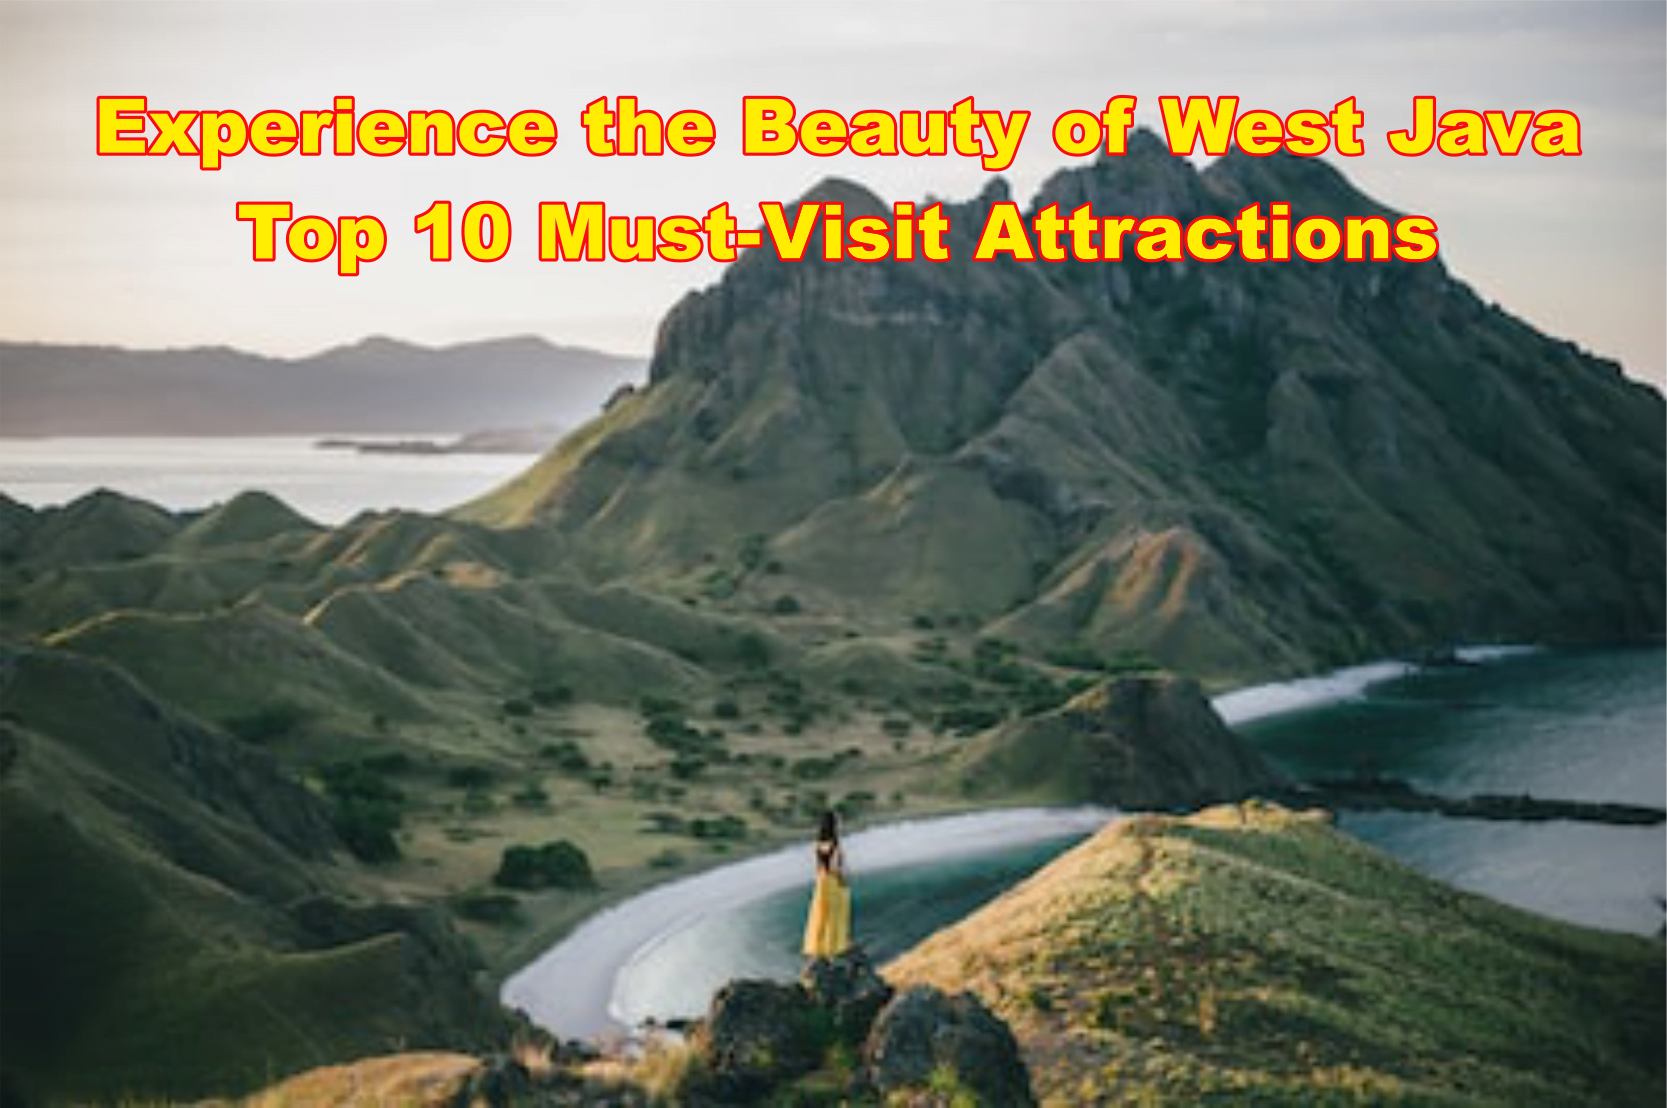 Experience the Beauty of West Java: Top 10 Must-Visit Attractions